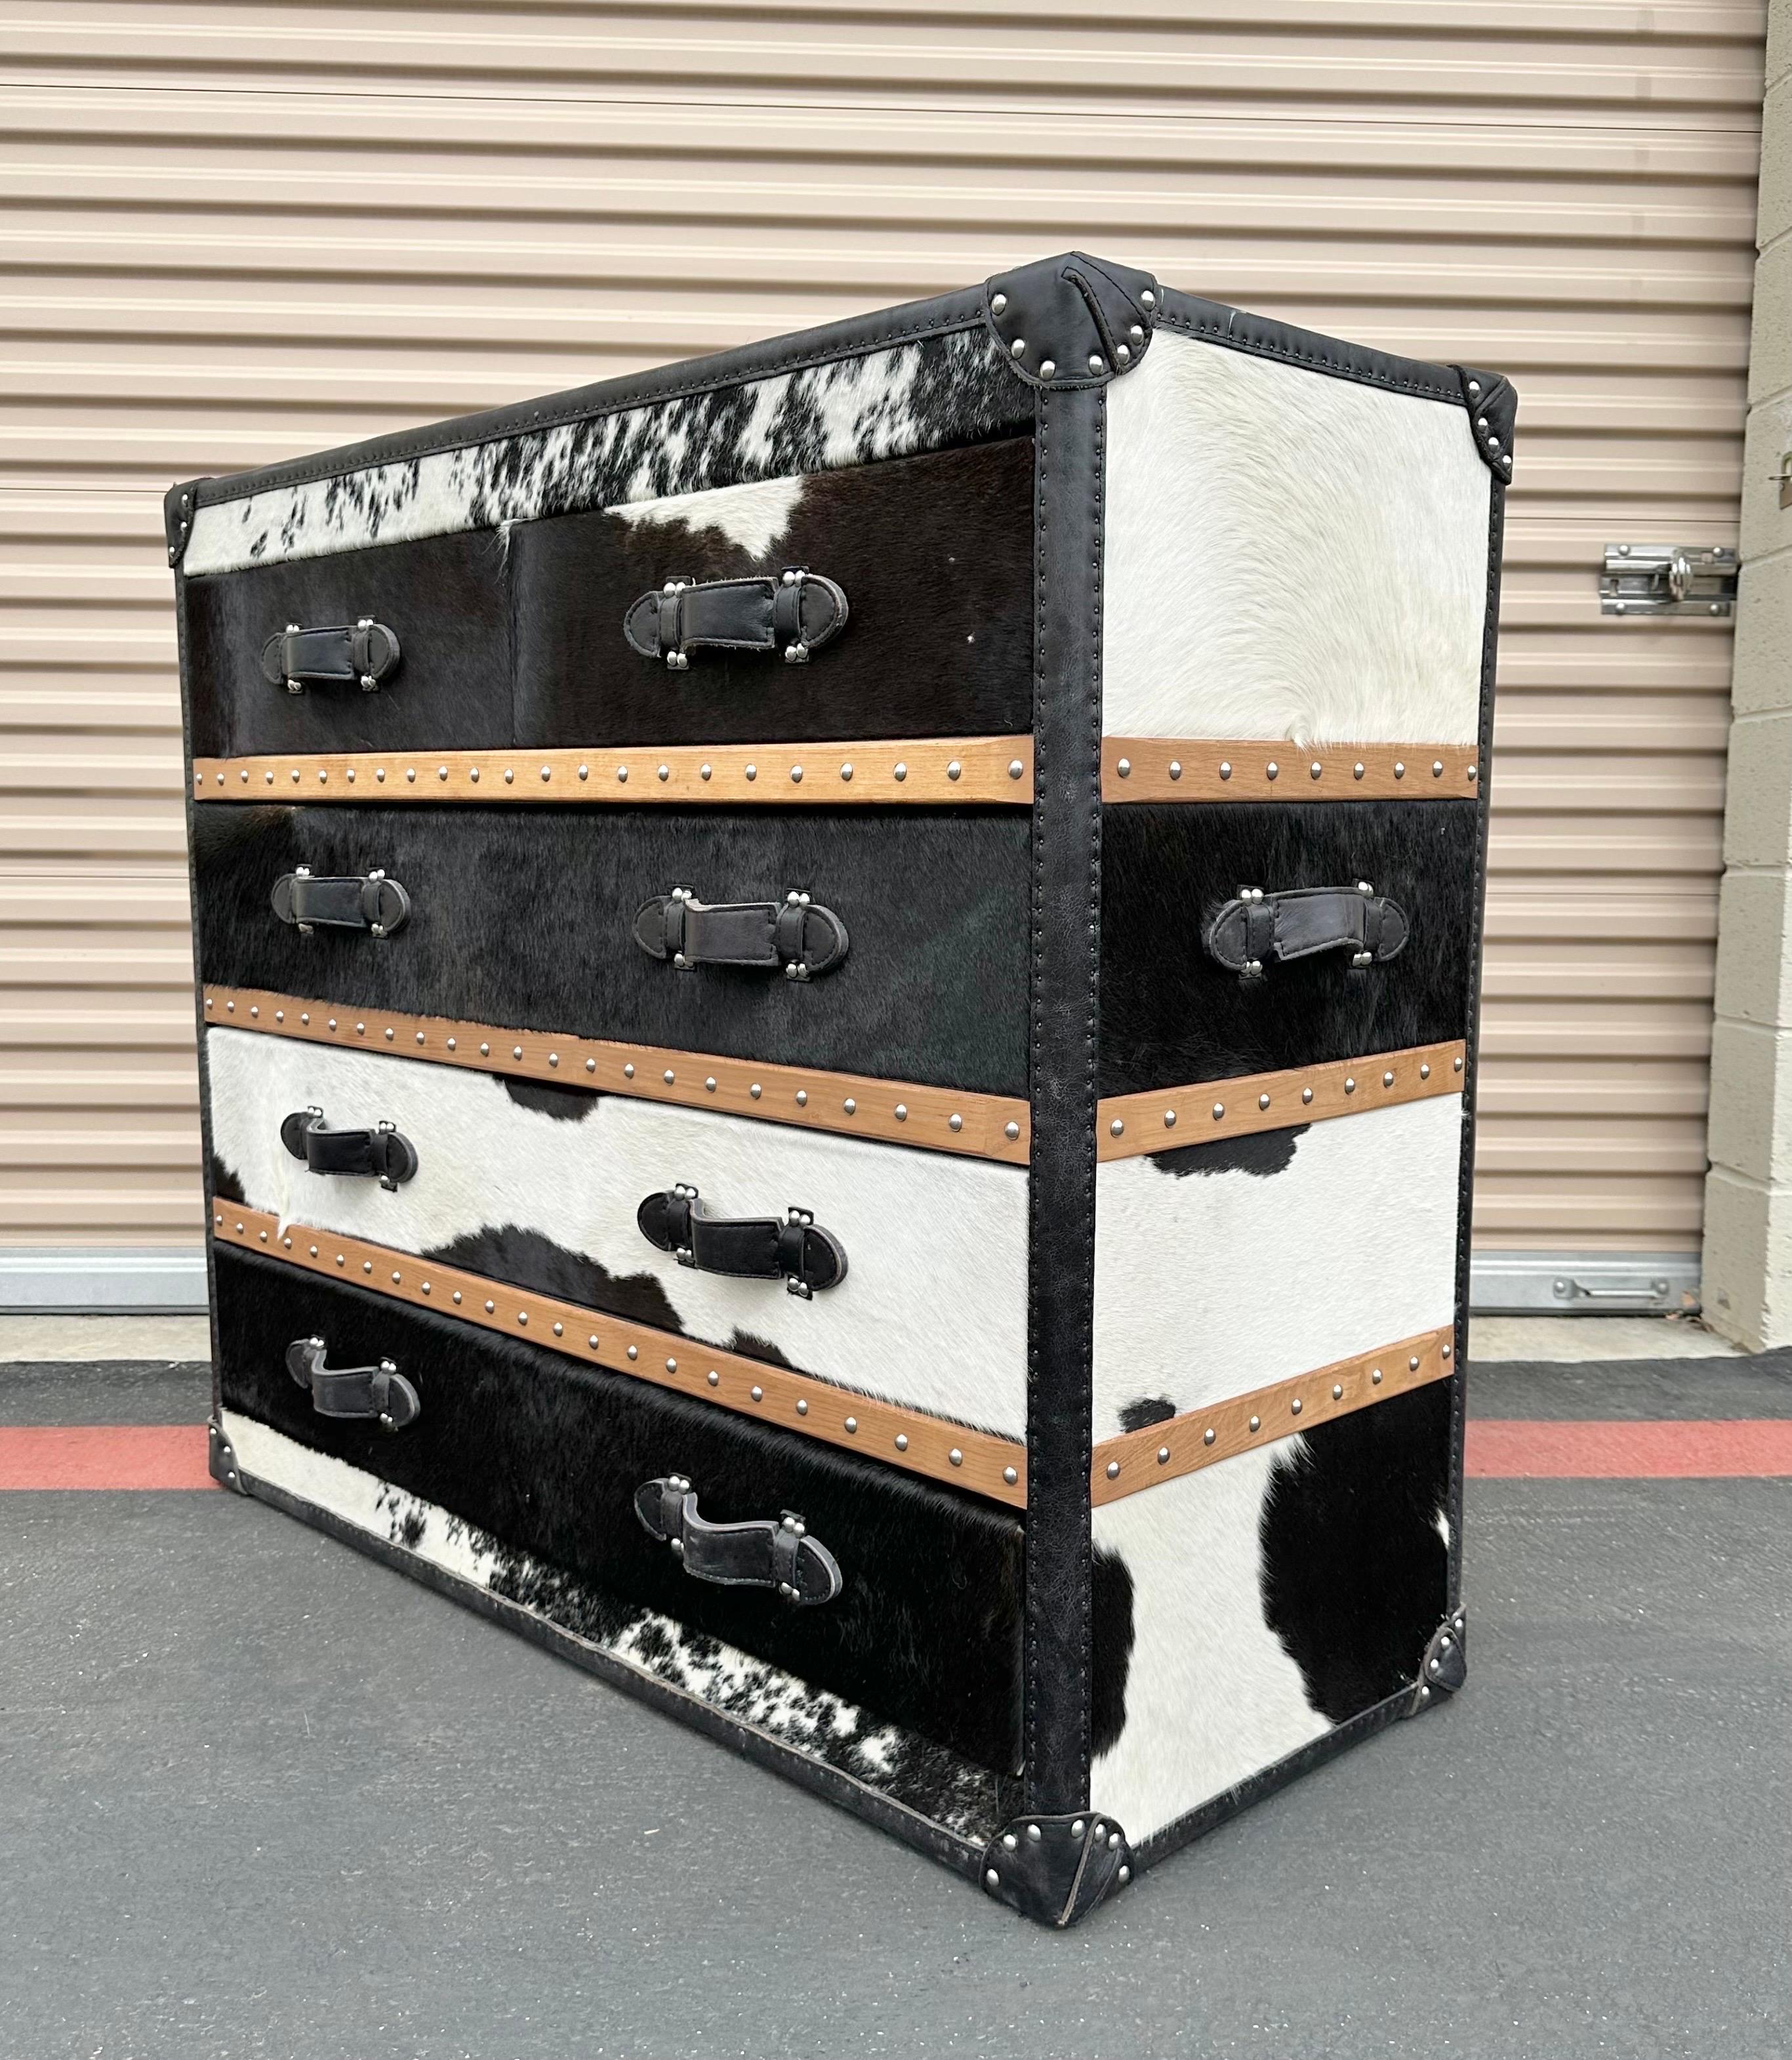 Spectacular Black and White Cowhide Long Chest handcrafted. Made in Italy in 2018. Made of solid teak wood, black and white cowhide, black leather handles and polished  stainless steel nails,  It also have fabric inside the drawers. Five drawers,